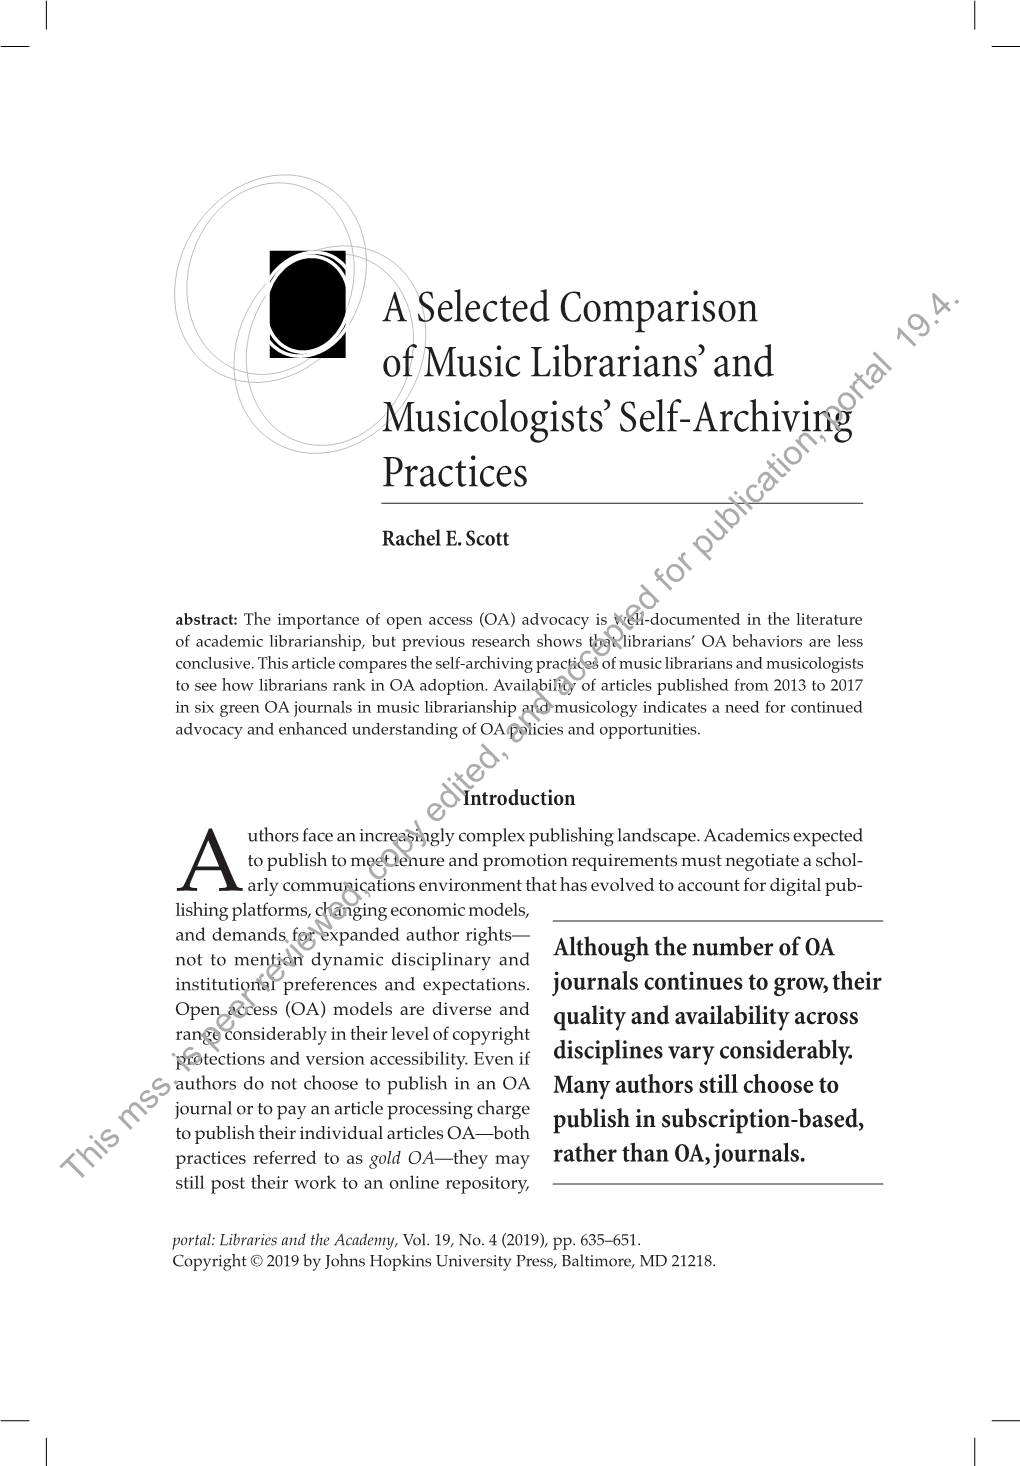 A Selected Comparison of Music Librarians' and Musicologists' Self